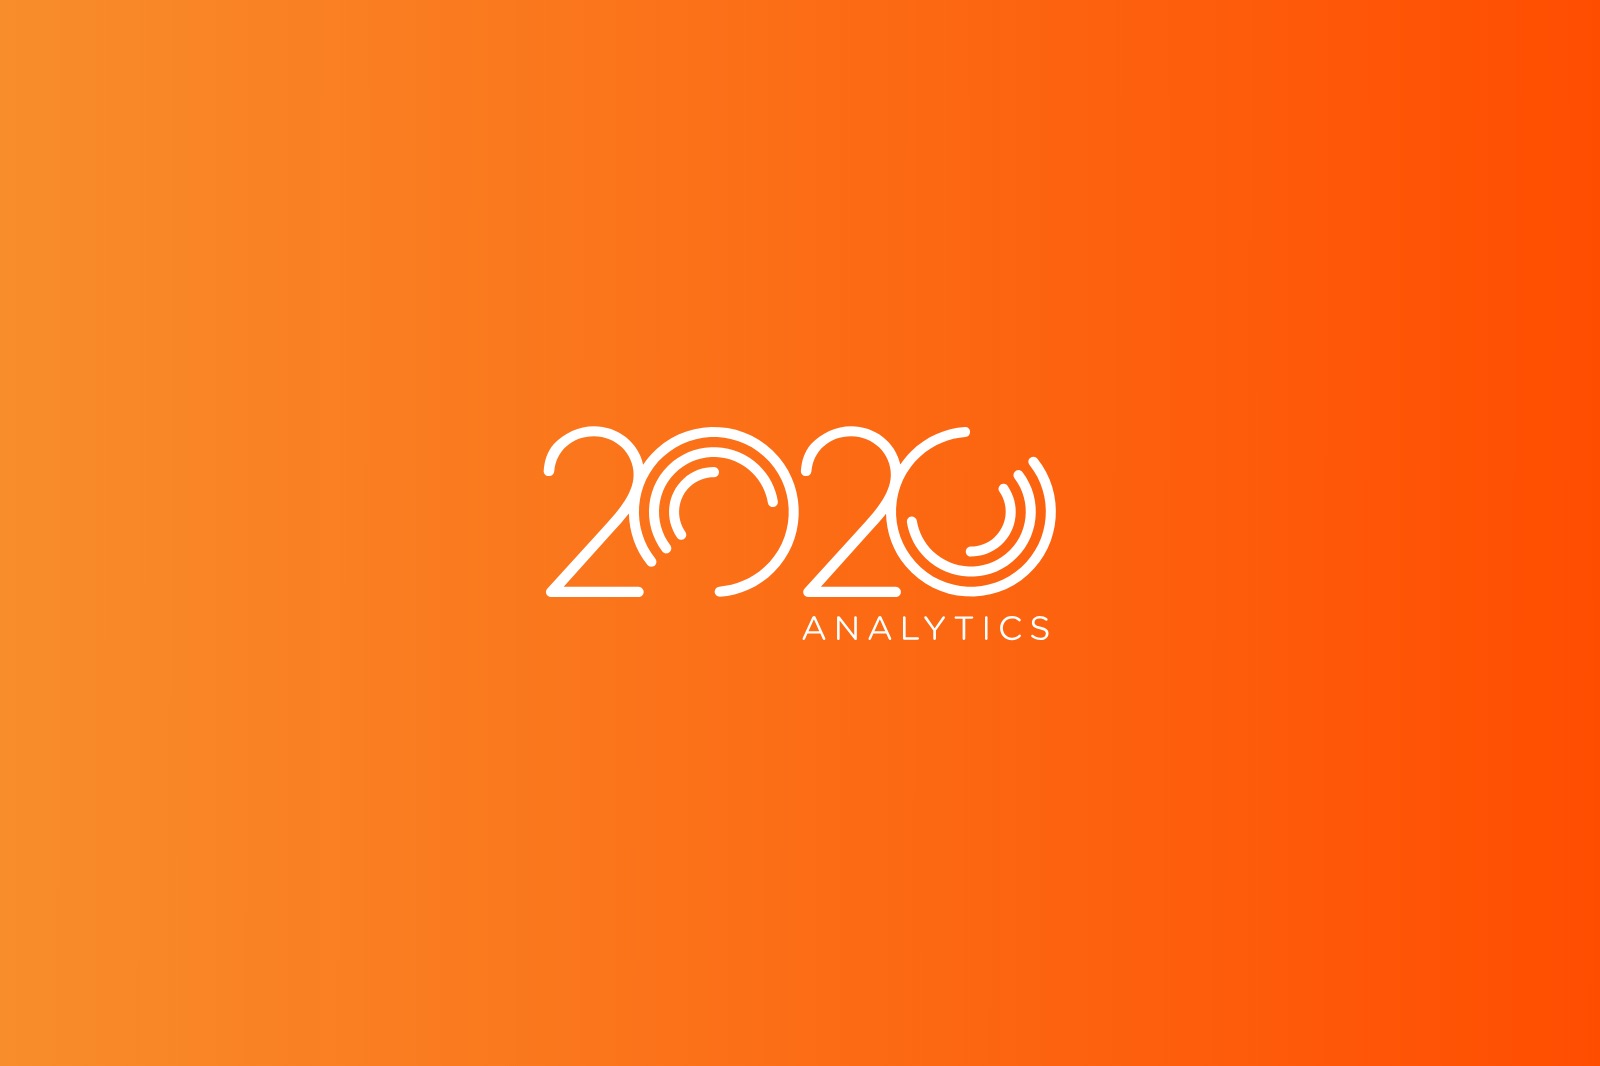 kabookaboo adds 2020 Analytics to Client Roster